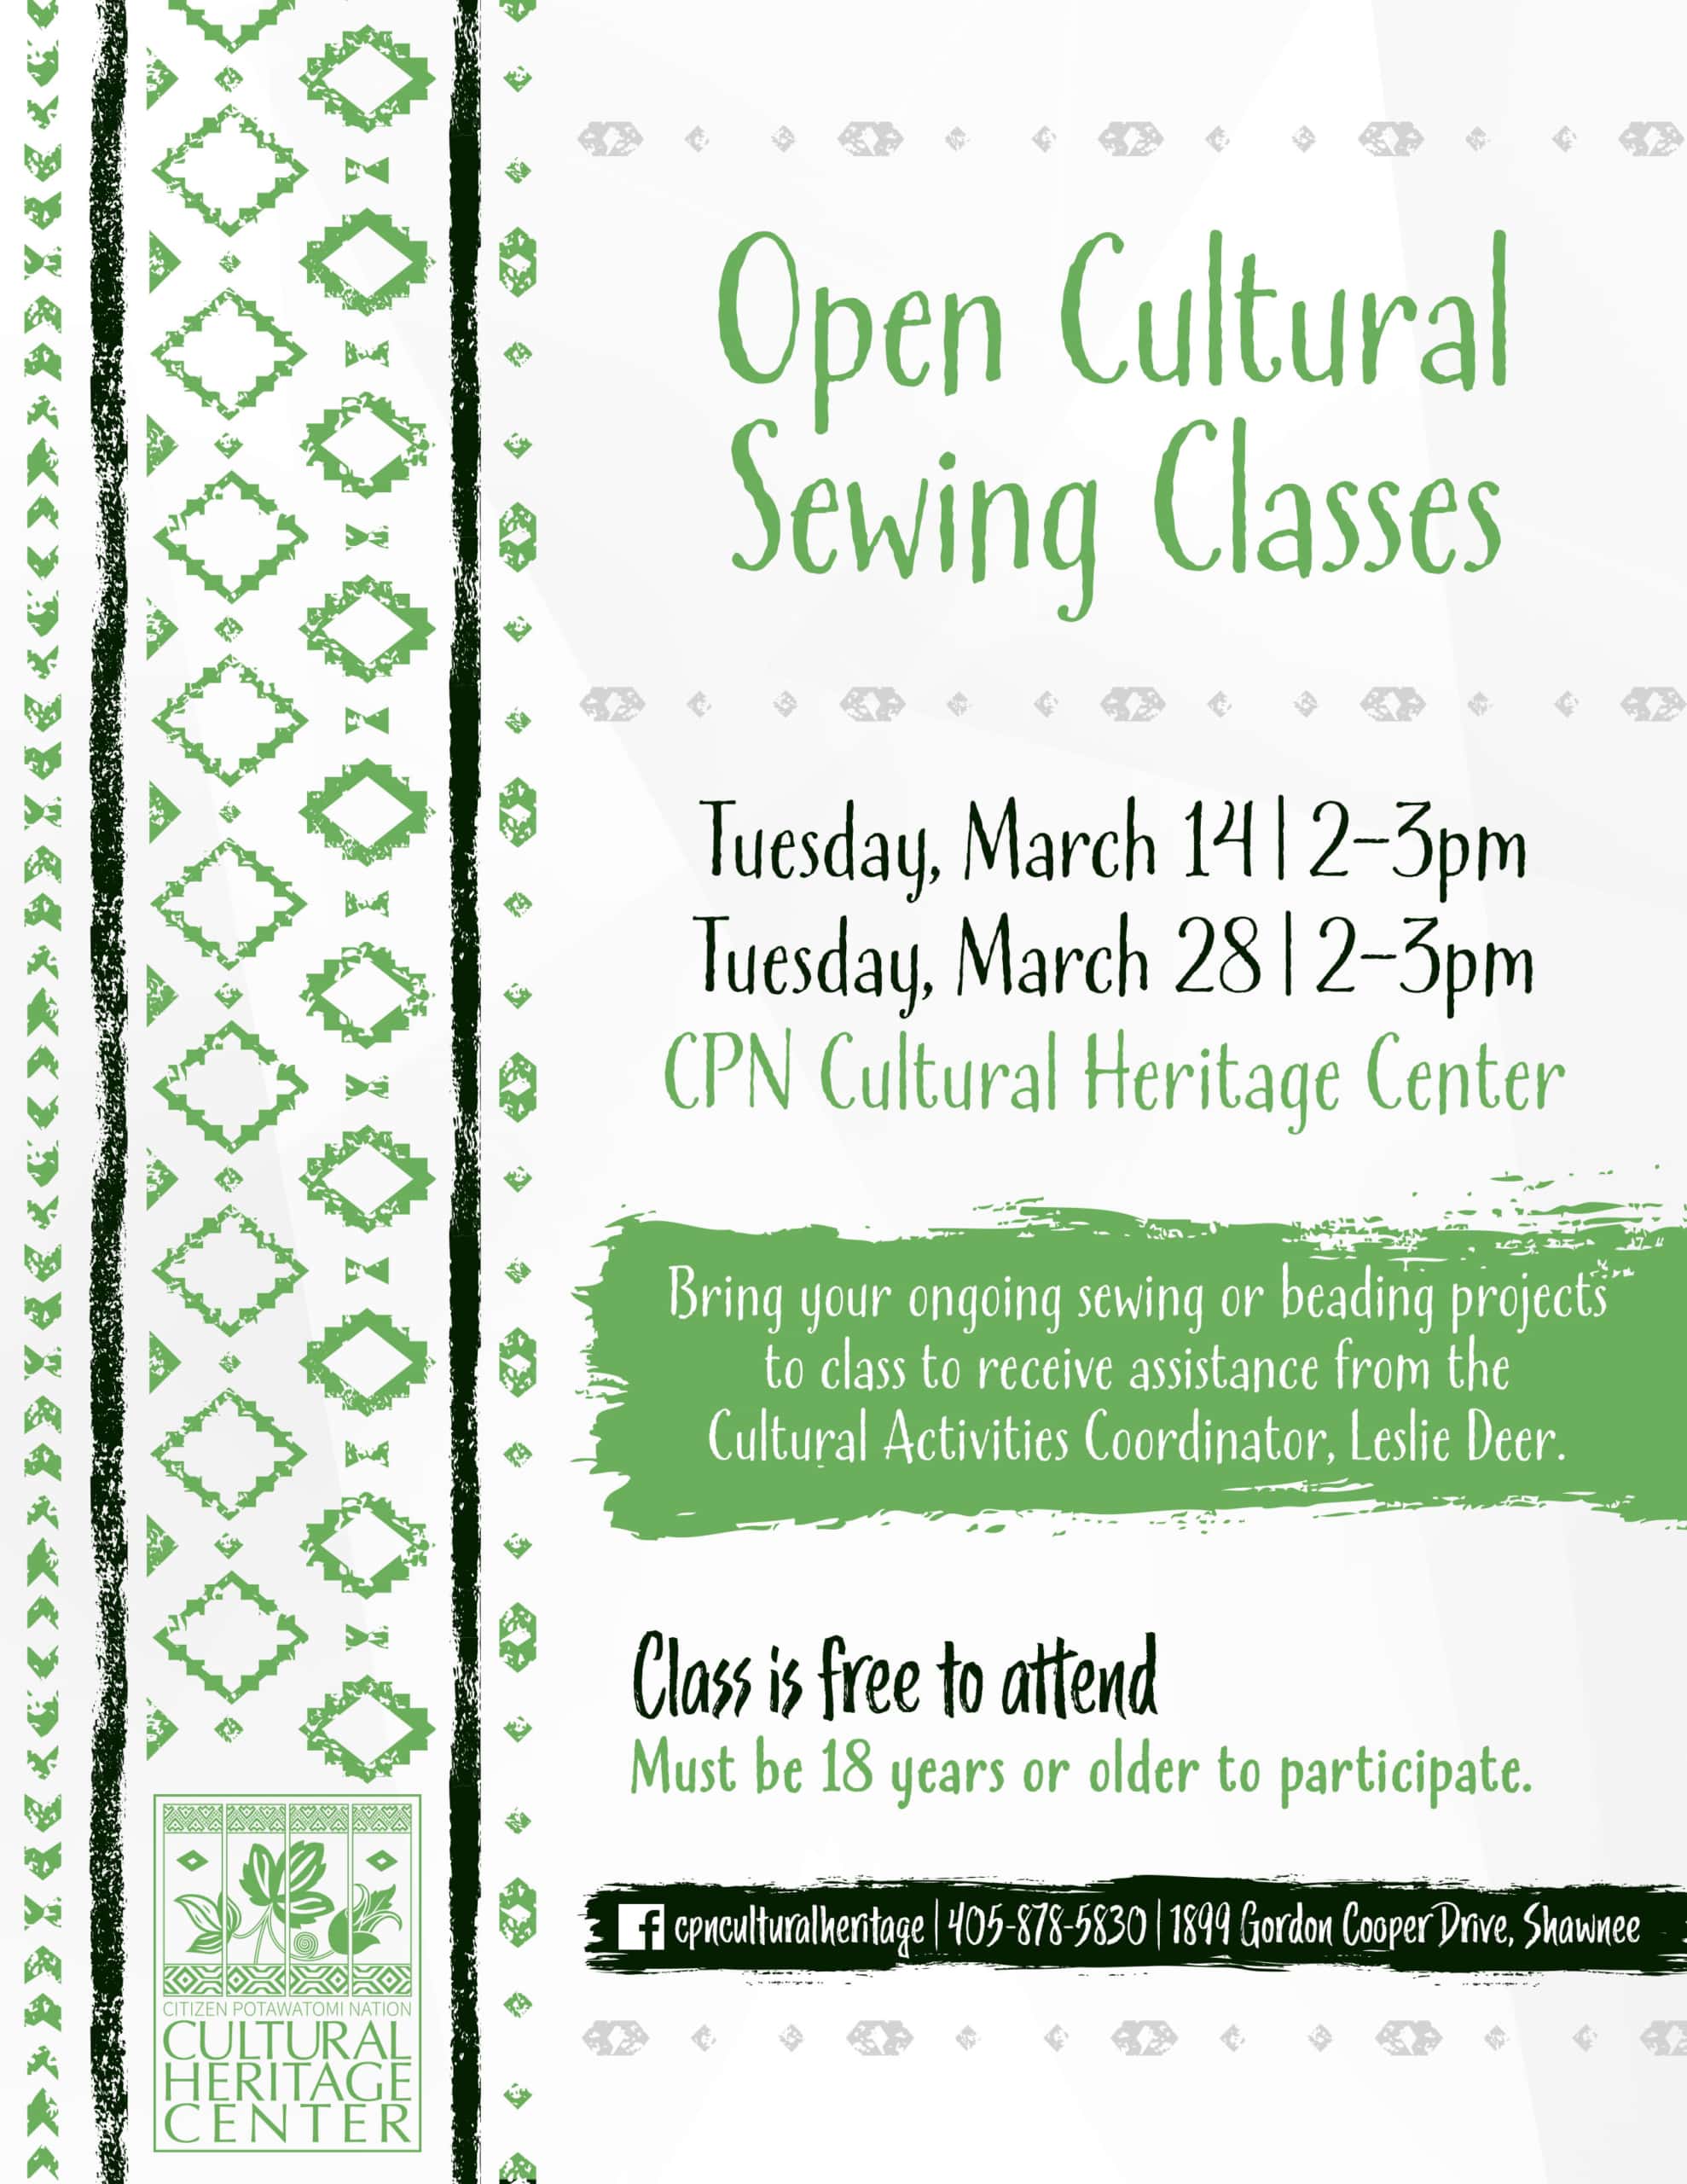 Green geometric designs frame text announcing the March 2023 Open Cultural Sewing Classes.